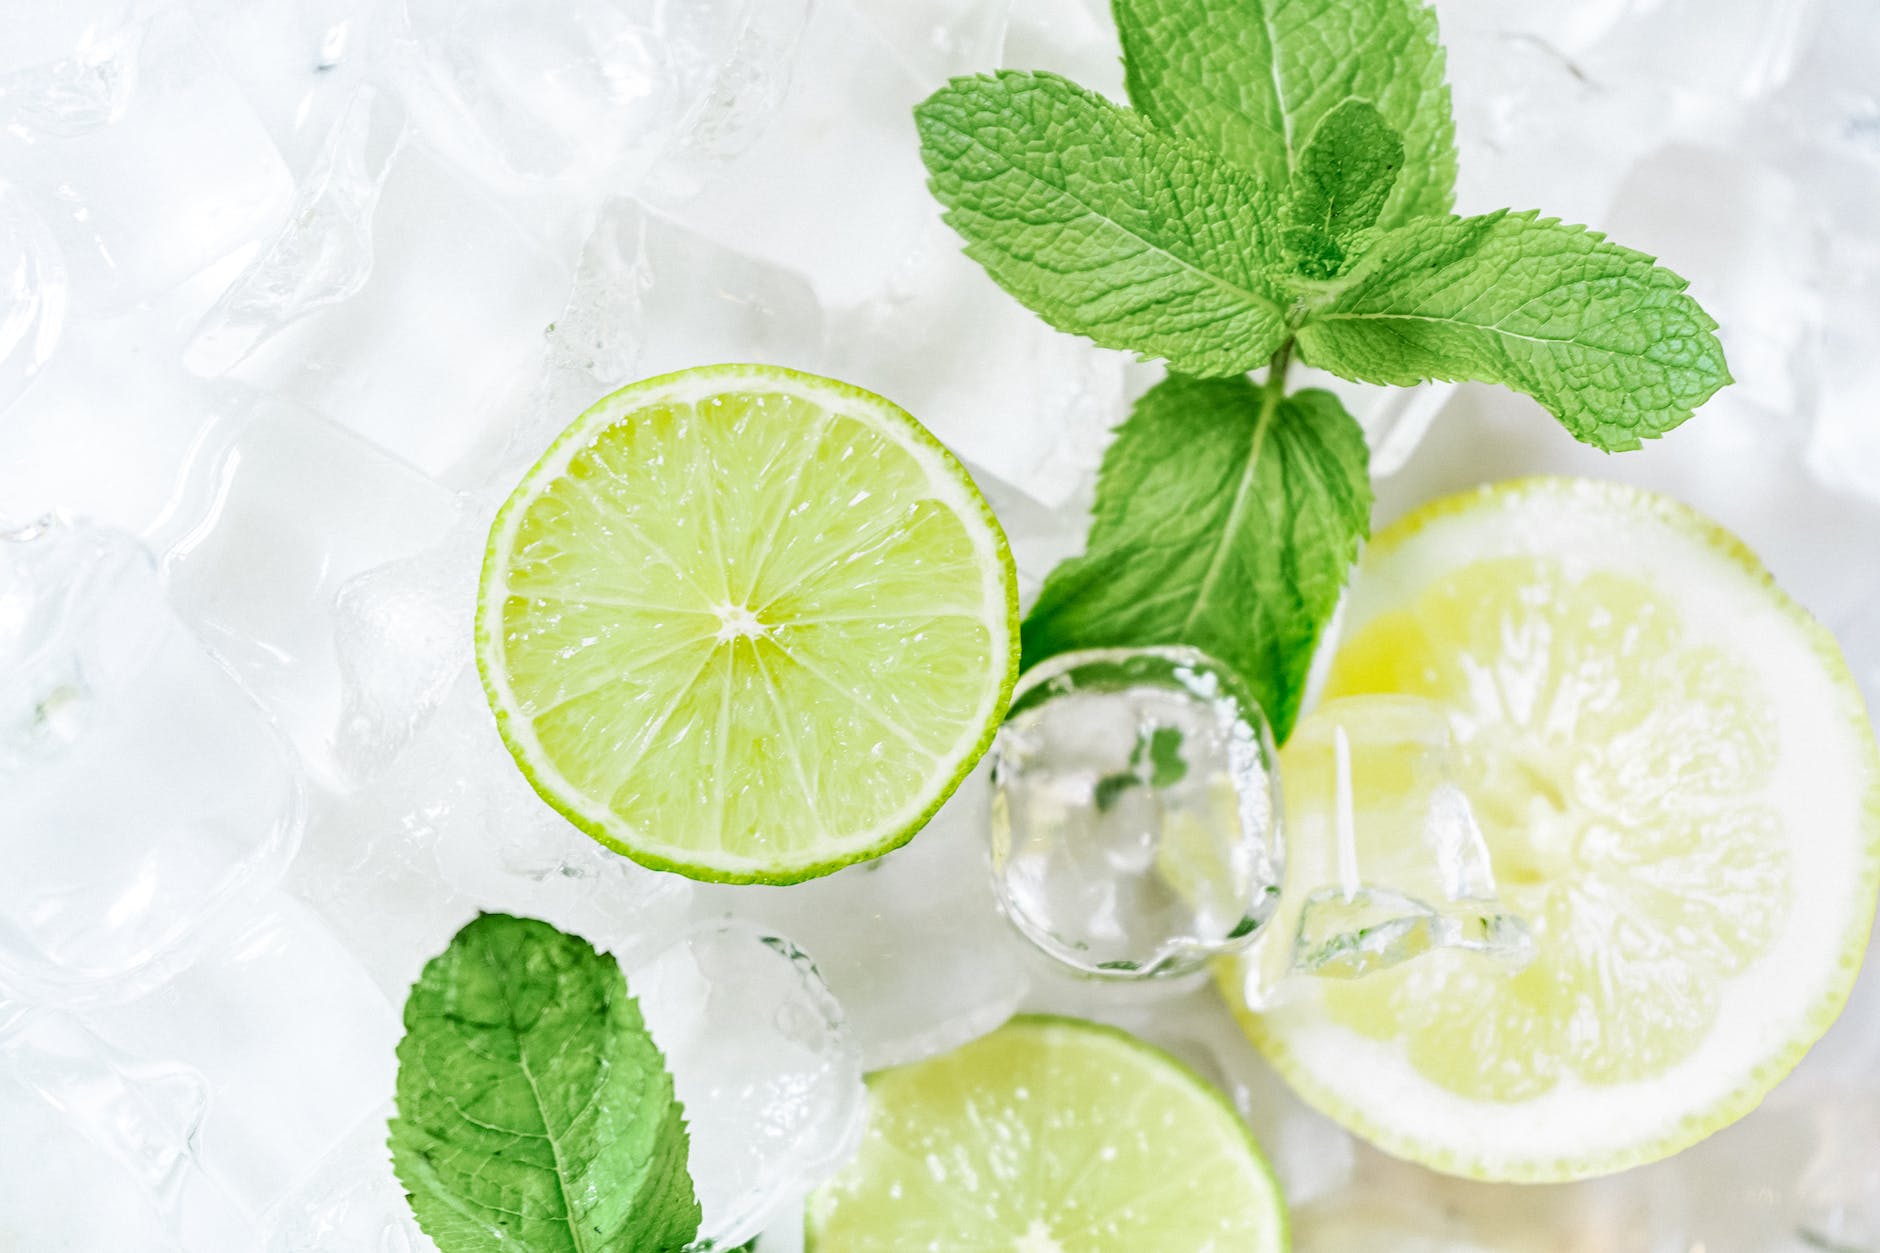 lime slices and mint with ice cubes
Photo by Antoni Shkraba on Pexels.com